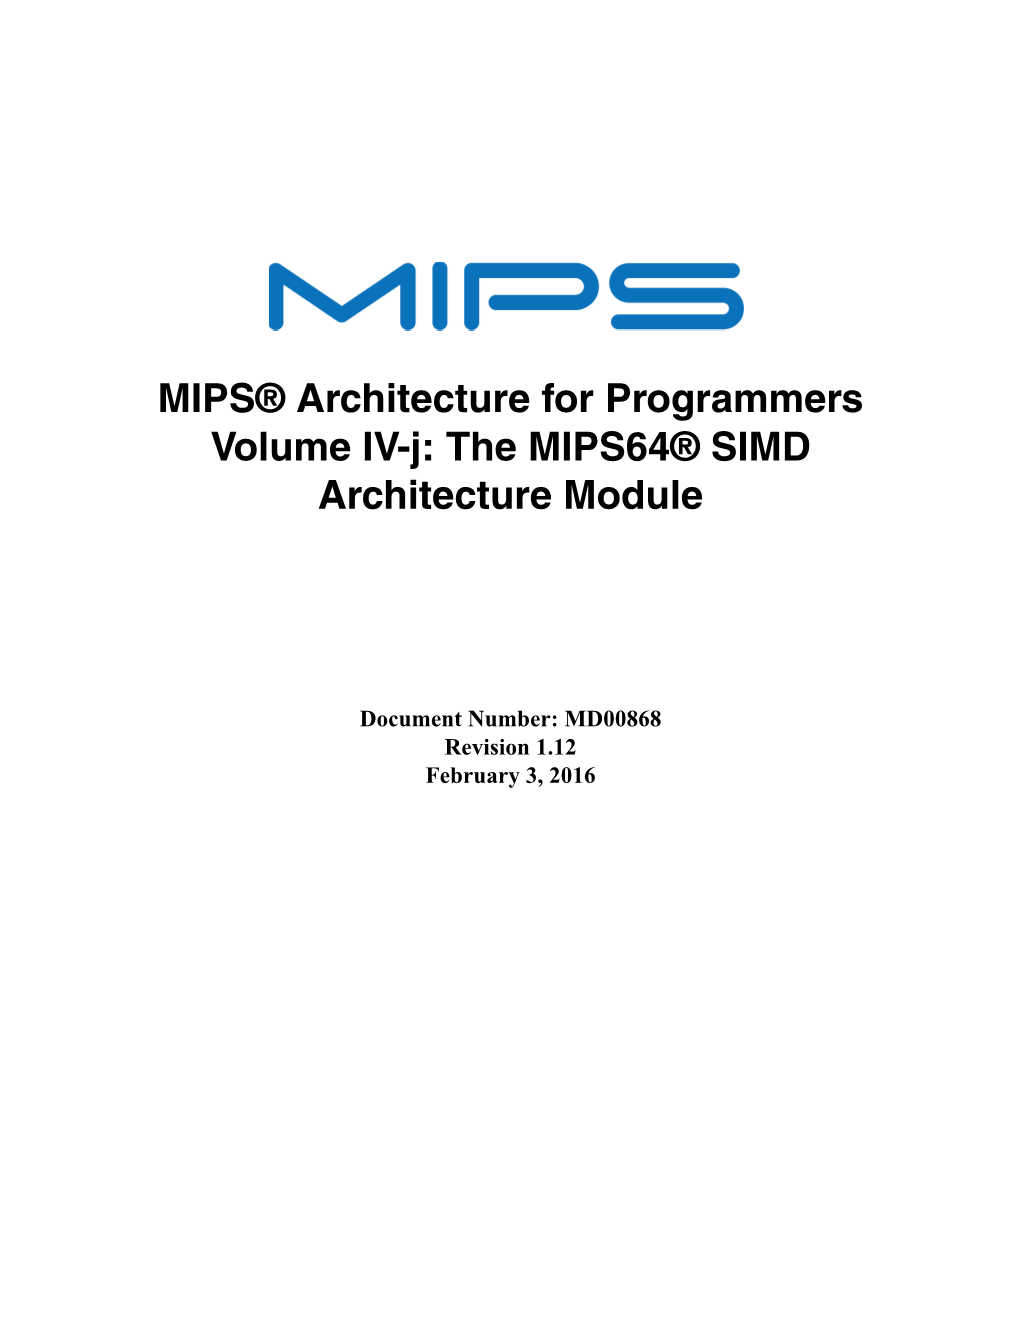 MIPS® Architecture for Programmers Volume IV-J: the MIPS64® SIMD Architecture Module Comes As Part of a Multi-Volume Set